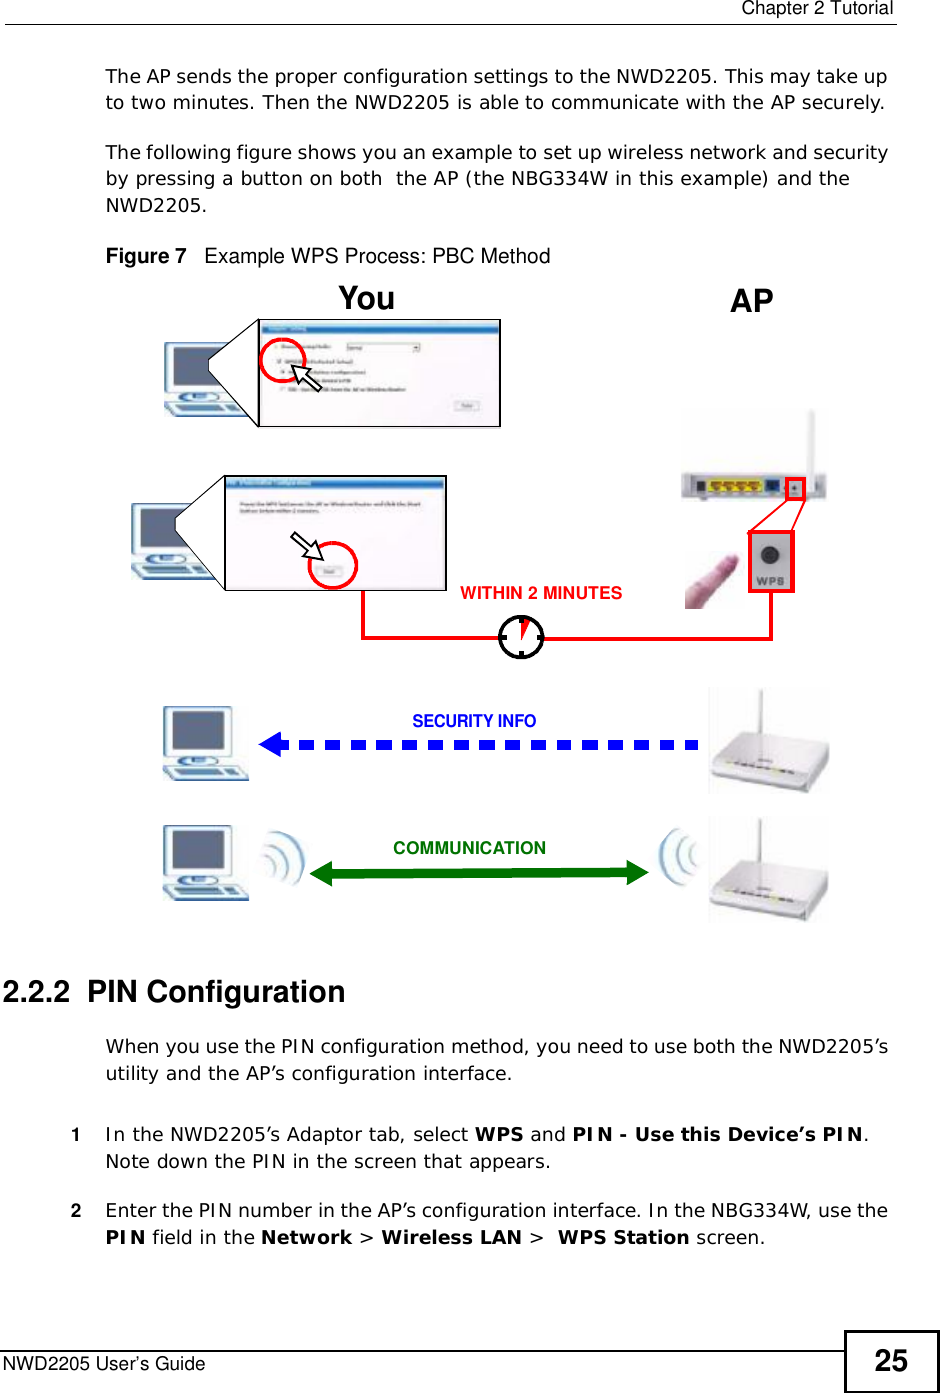  Chapter 2TutorialNWD2205 User’s Guide 25The AP sends the proper configuration settings to the NWD2205. This may take up to two minutes. Then the NWD2205 is able to communicate with the AP securely. The following figure shows you an example to set up wireless network and security by pressing a button on both  the AP (the NBG334W in this example) and the NWD2205.Figure 7   Example WPS Process: PBC Method2.2.2  PIN ConfigurationWhen you use the PIN configuration method, you need to use both the NWD2205’s utility and the AP’s configuration interface.1In the NWD2205’s Adaptor tab, select WPS and PIN - Use this Device’s PIN.Note down the PIN in the screen that appears. 2Enter the PIN number in the AP’s configuration interface. In the NBG334W, use the PIN field in the Network &gt; Wireless LAN &gt;WPS Station screen. You APSECURITY INFOCOMMUNICATIONWITHIN 2 MINUTES